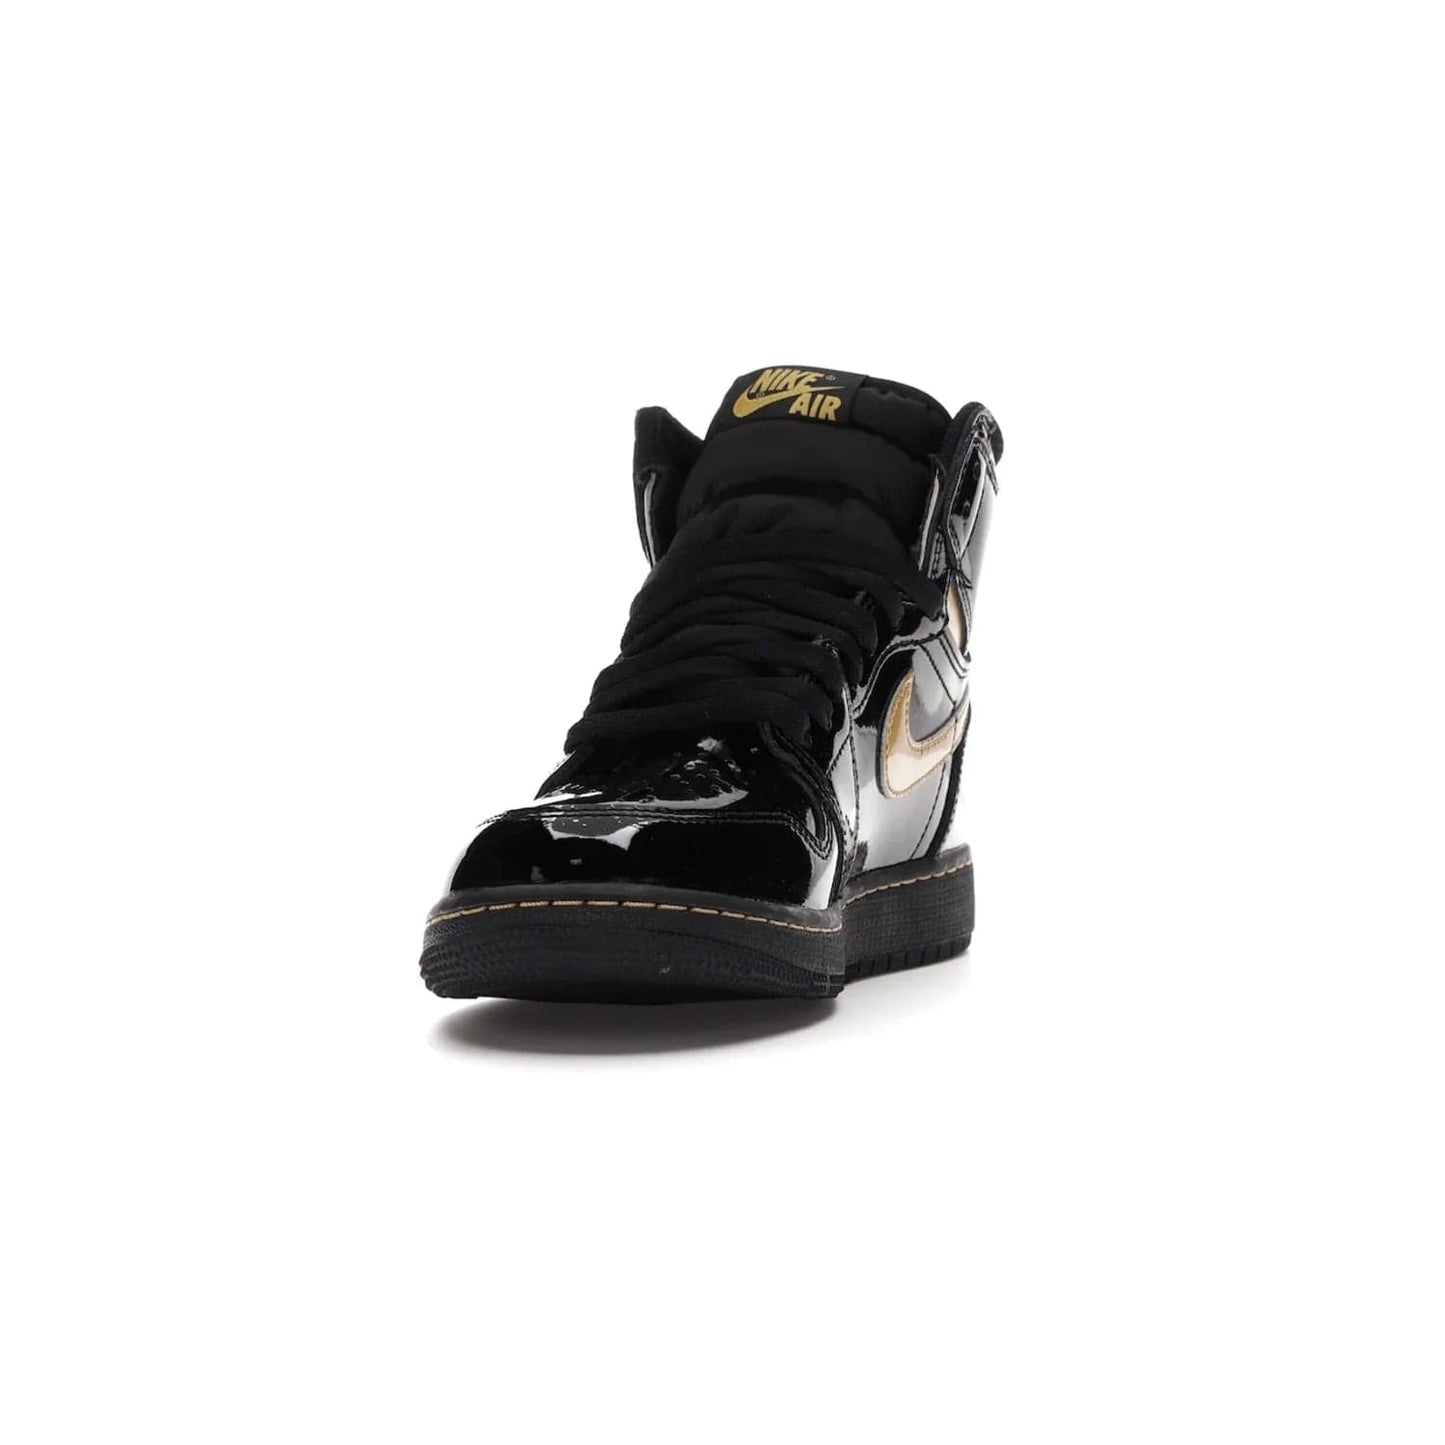 Jordan 1 Retro High Black Metallic Gold (2020) (GS) - Image 12 - Only at www.BallersClubKickz.com - Shop the Kids Air Jordan 1 Retro High in Black Metallic Gold for a stylish and comfortable sneaker kids can love. Featuring black and metallic gold patent leather uppers, metallic gold accents, and an Air sole unit for extra cushioning.